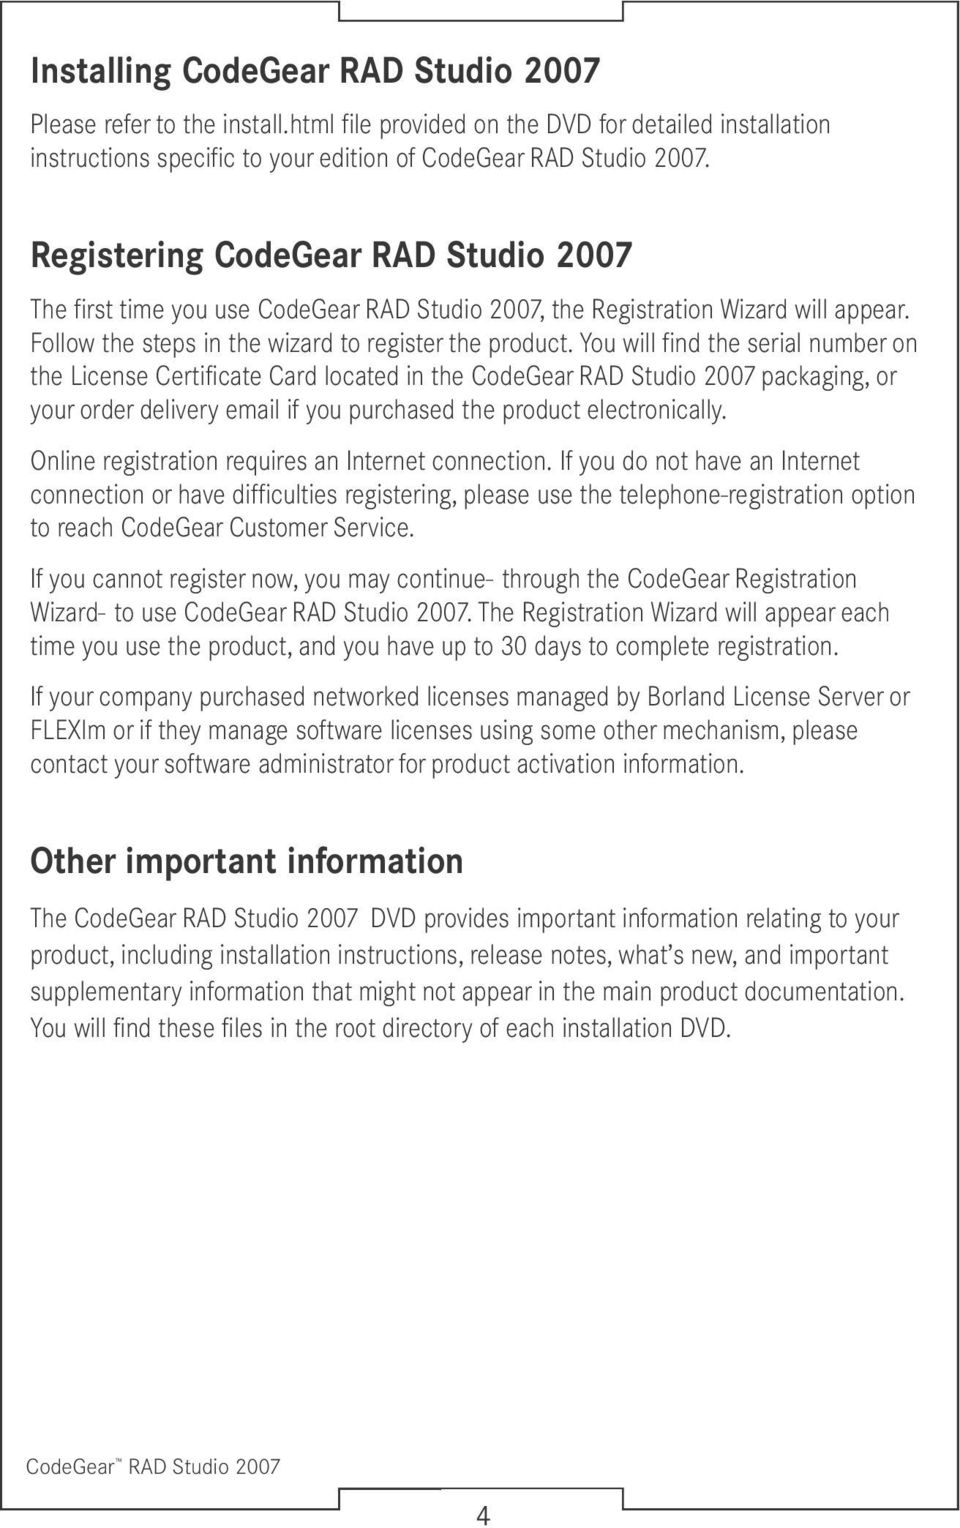 You will find the serial number on the License Certificate Card located in the CodeGear RAD Studio 2007 packaging, or your order delivery email if you purchased the product electronically.